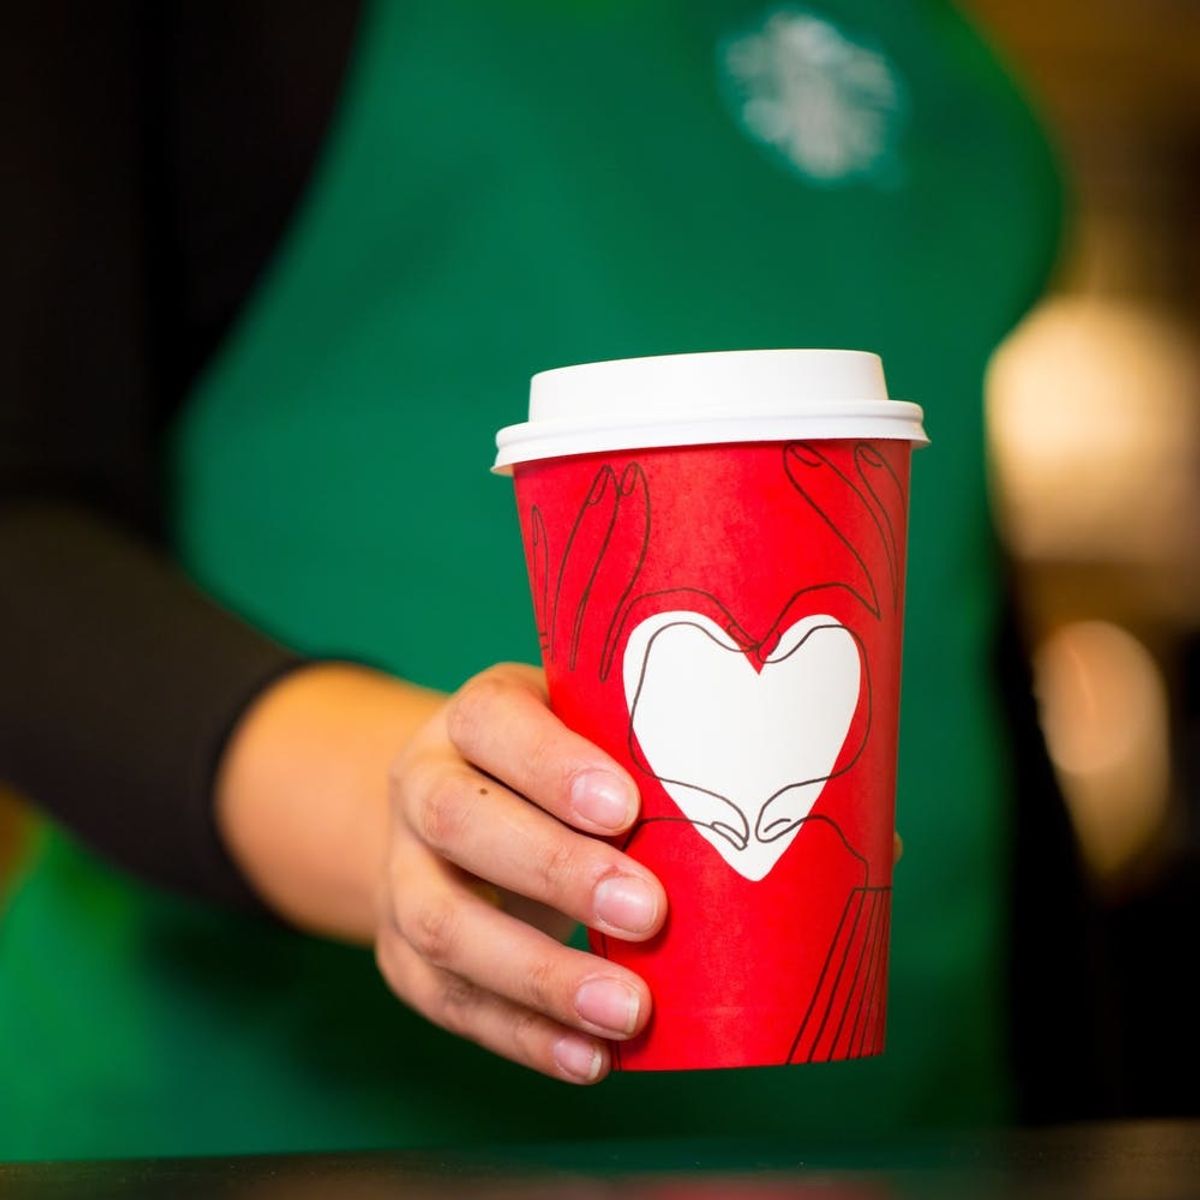 ALERT: Starbucks Just Released ANOTHER Limited Edition Holiday Cup